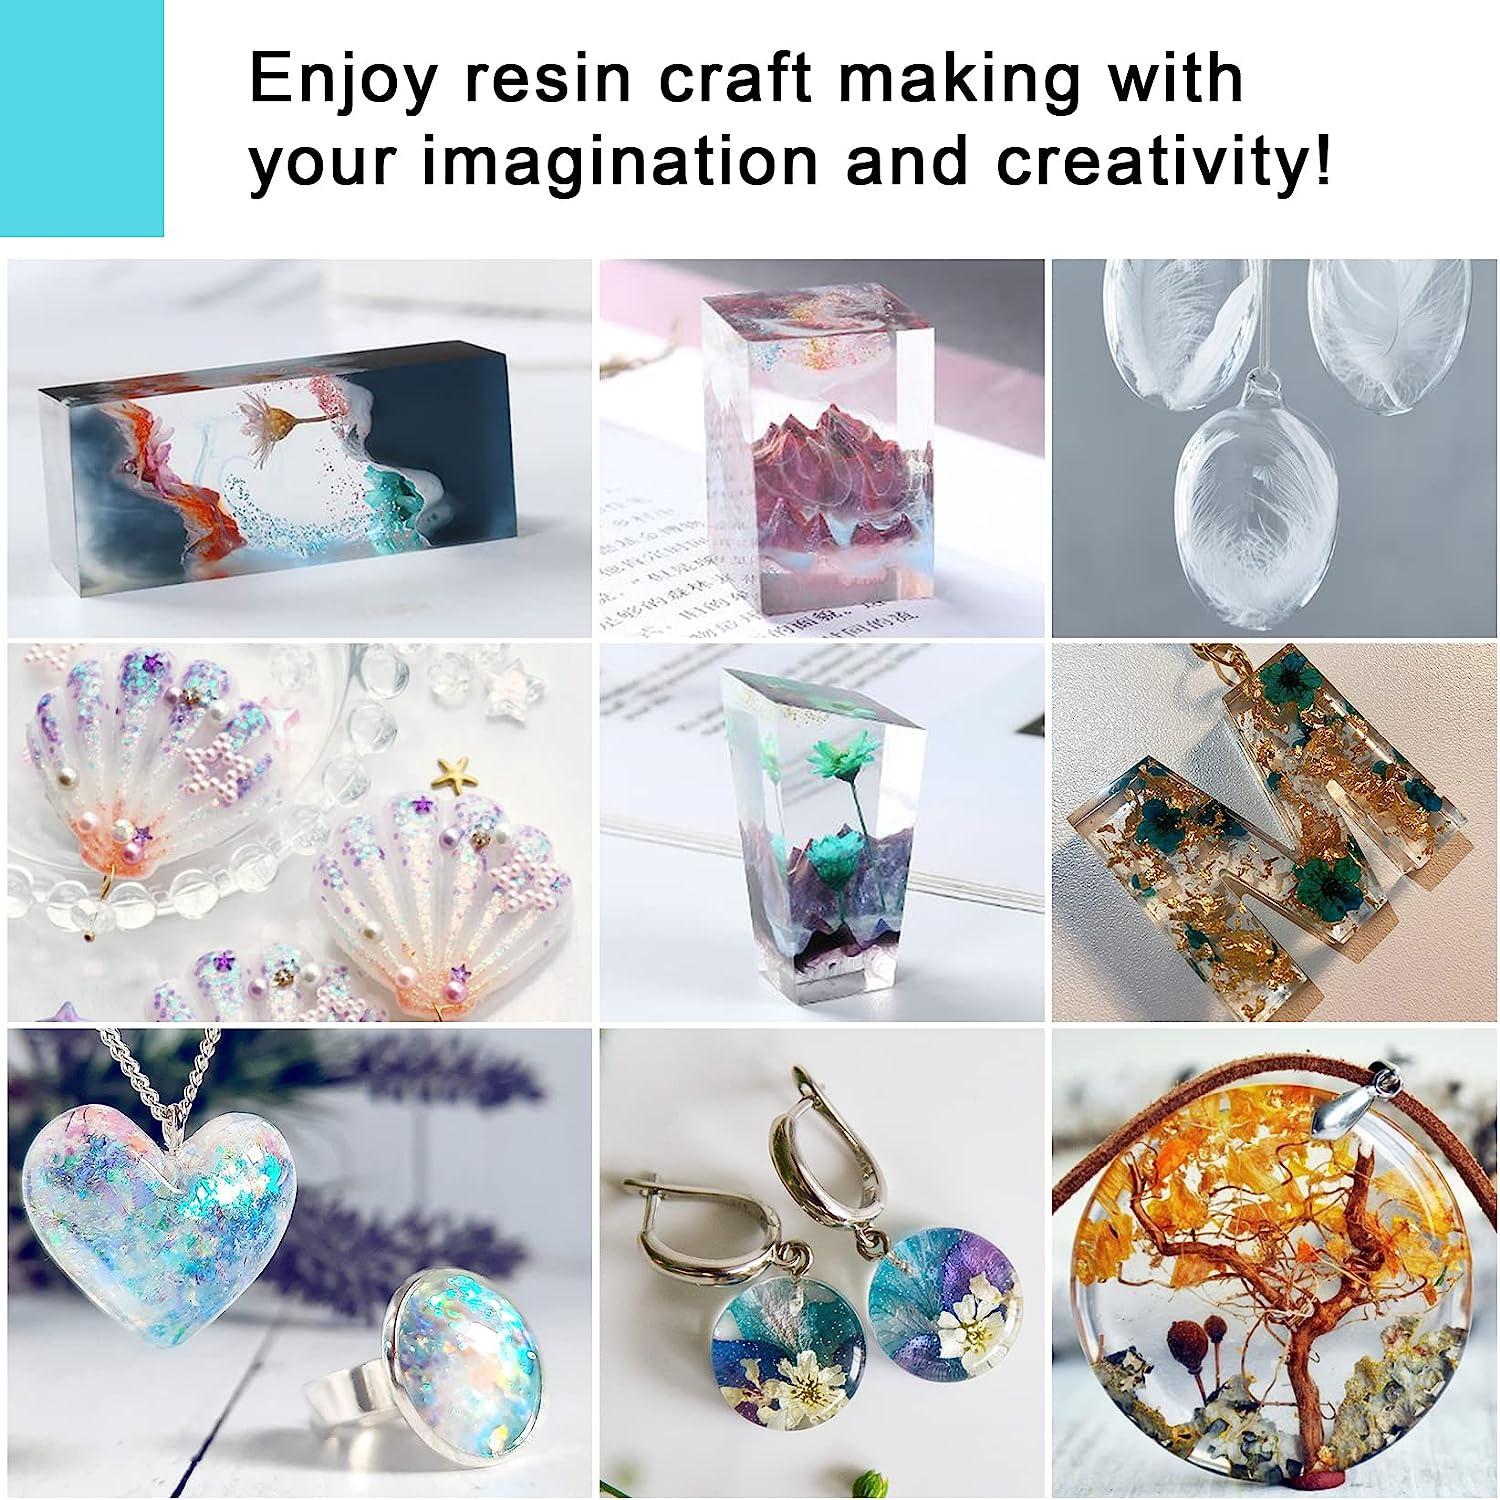  Epoxy Resin AB Part - 1 Gallon Crystal Clear Resin Kit for Art Craft  Resin Jewelry Making River Tables Casting and Coating 10 Mica Pigments, 2  Glow in The Dark Colors